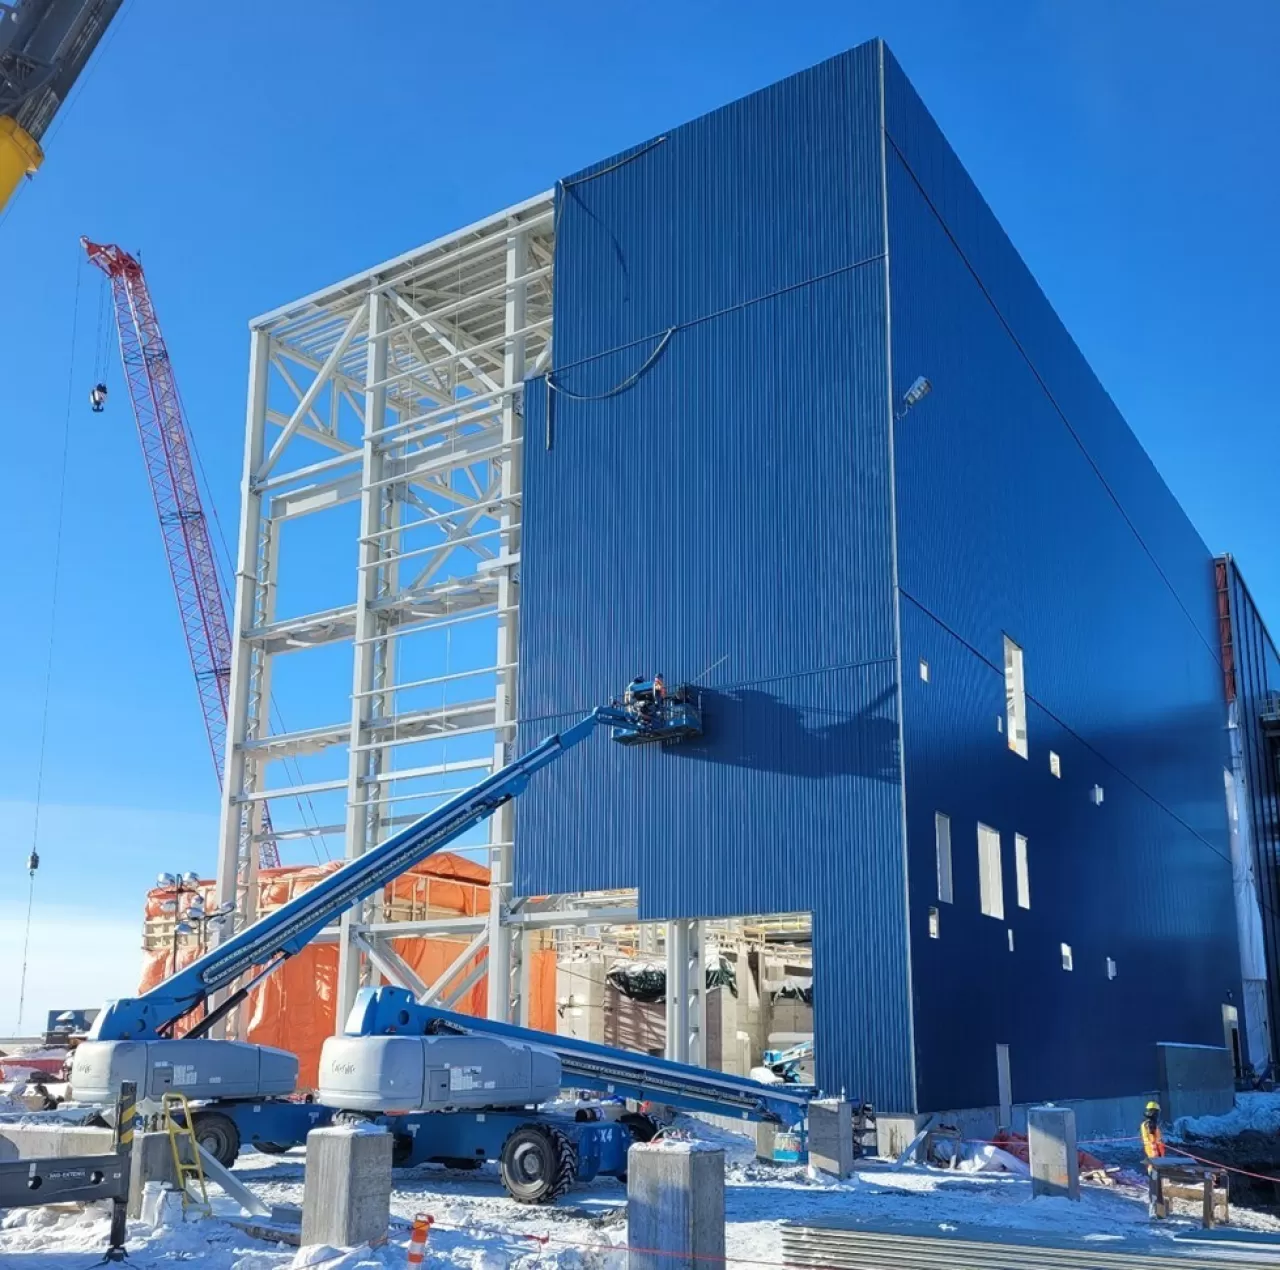 East end process plant - steelwork and cladding. (CNW Group/Equinox Gold Corp.) img#10